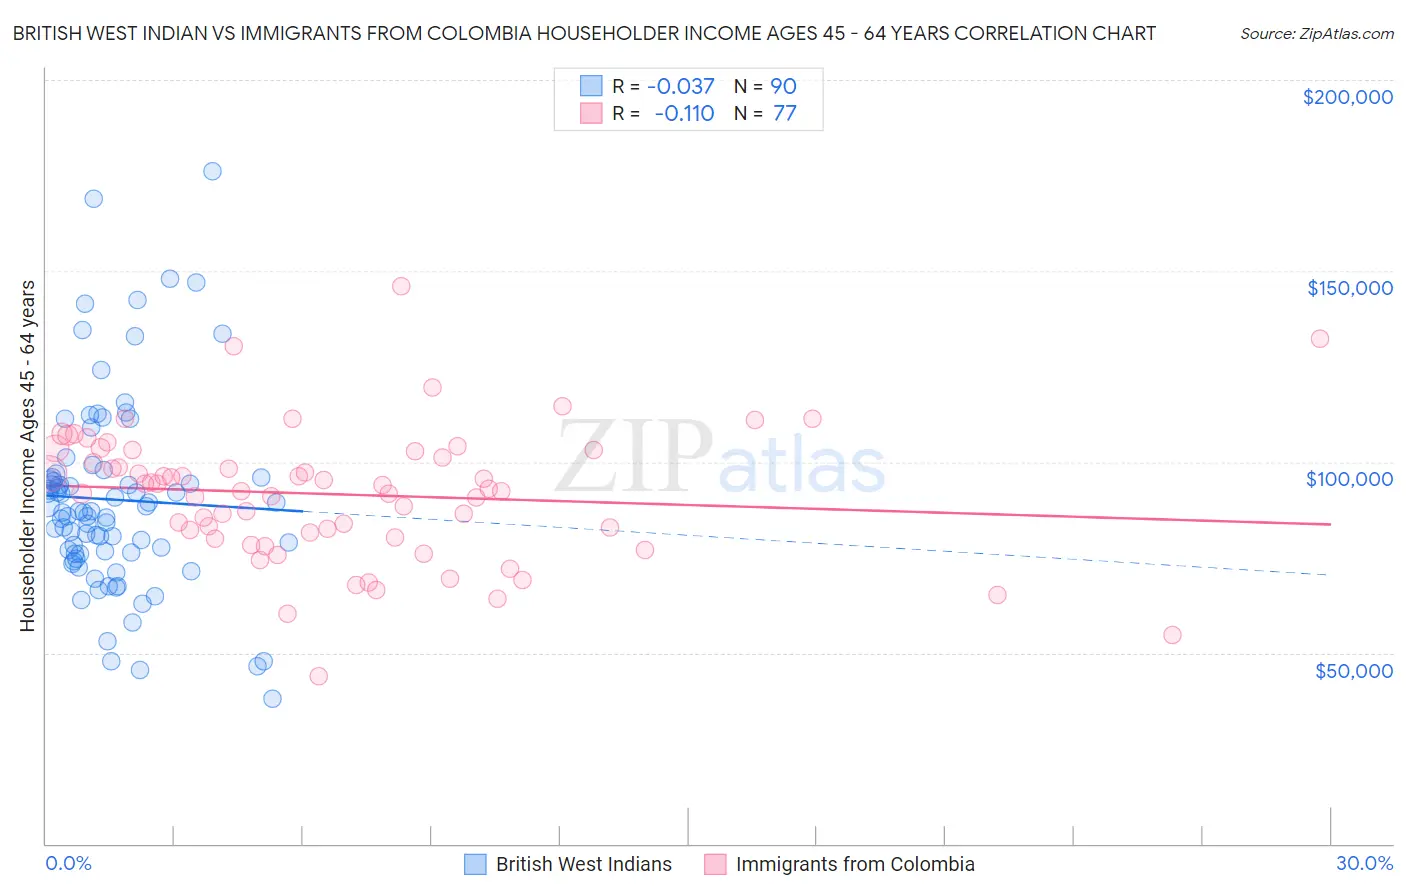 British West Indian vs Immigrants from Colombia Householder Income Ages 45 - 64 years